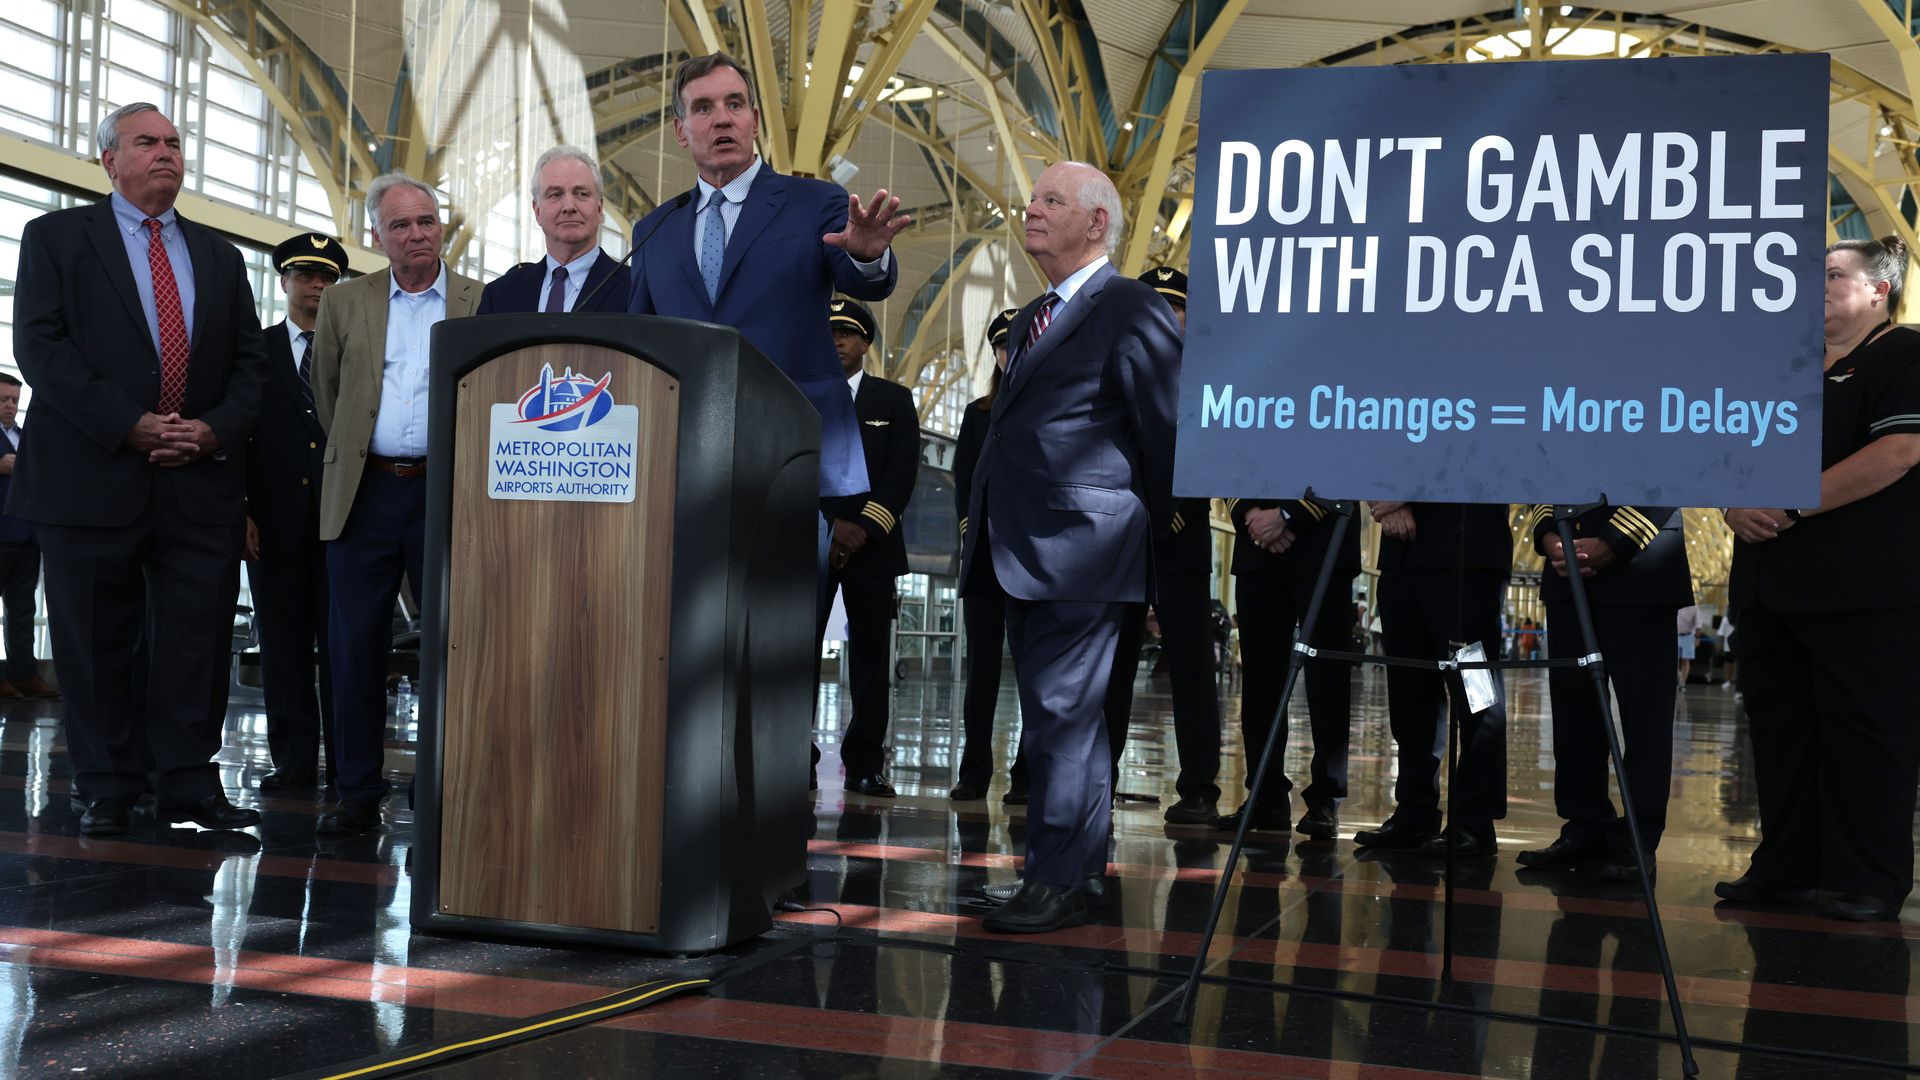 Sen Mark Warner speaks at a podium with a sign that says "Don't Gamble with DCA Slots" and "More Changes = More Delays"